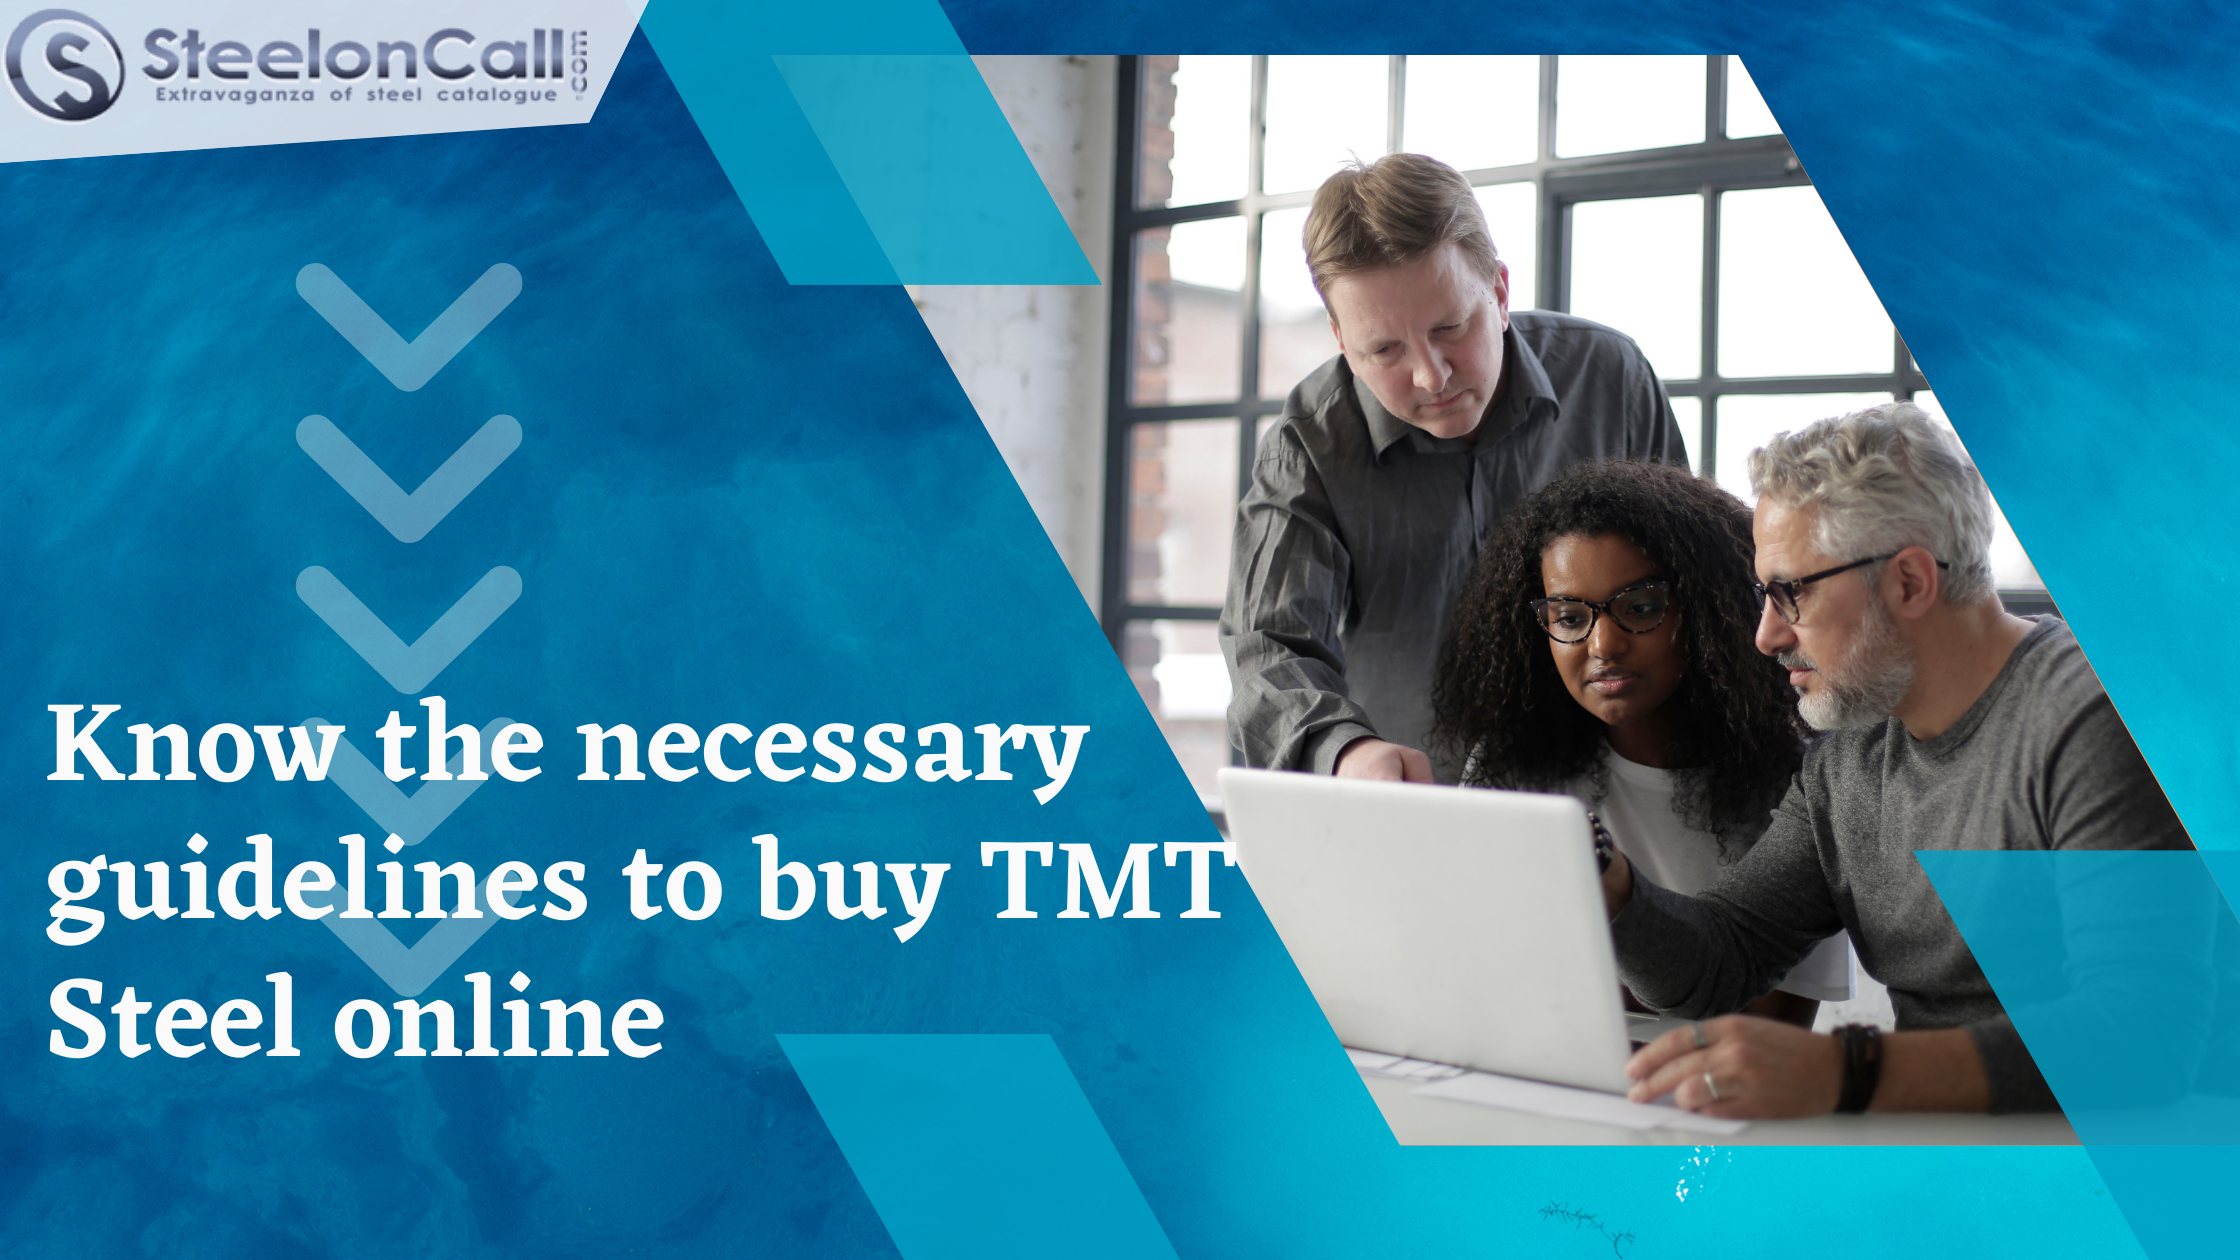 Know The Necessary Guidelines to Buy TMT Steel Online